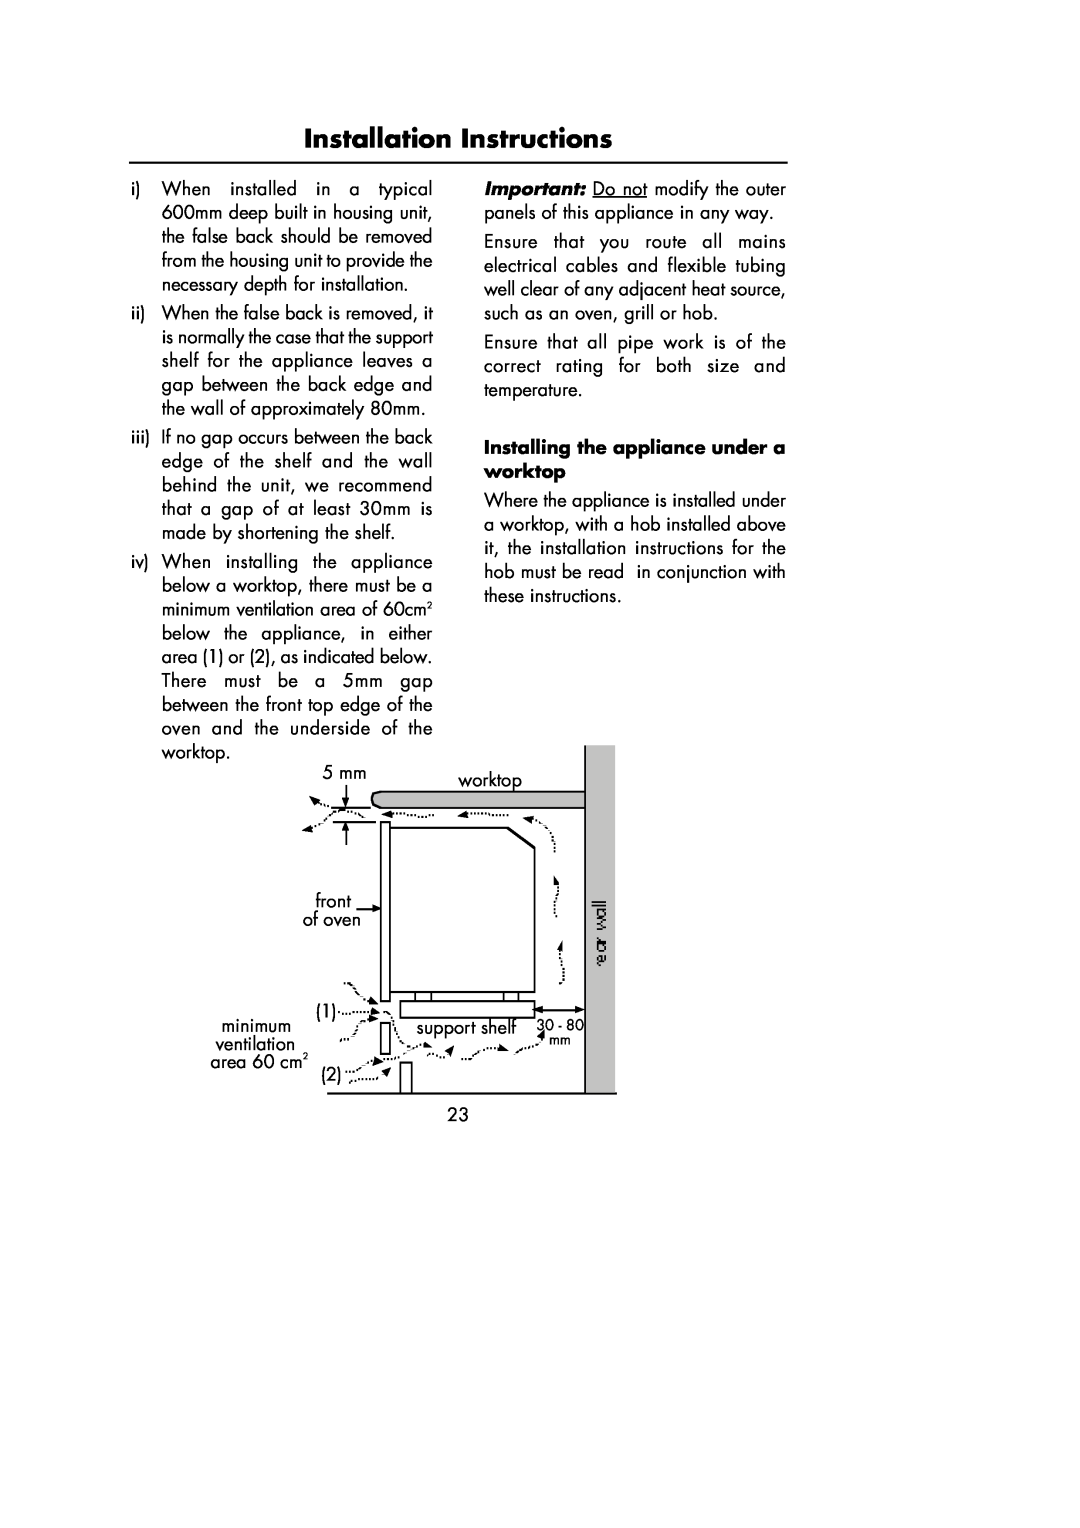 Hotpoint Oven manual Installing the appliance under a worktop, Installation Instructions 